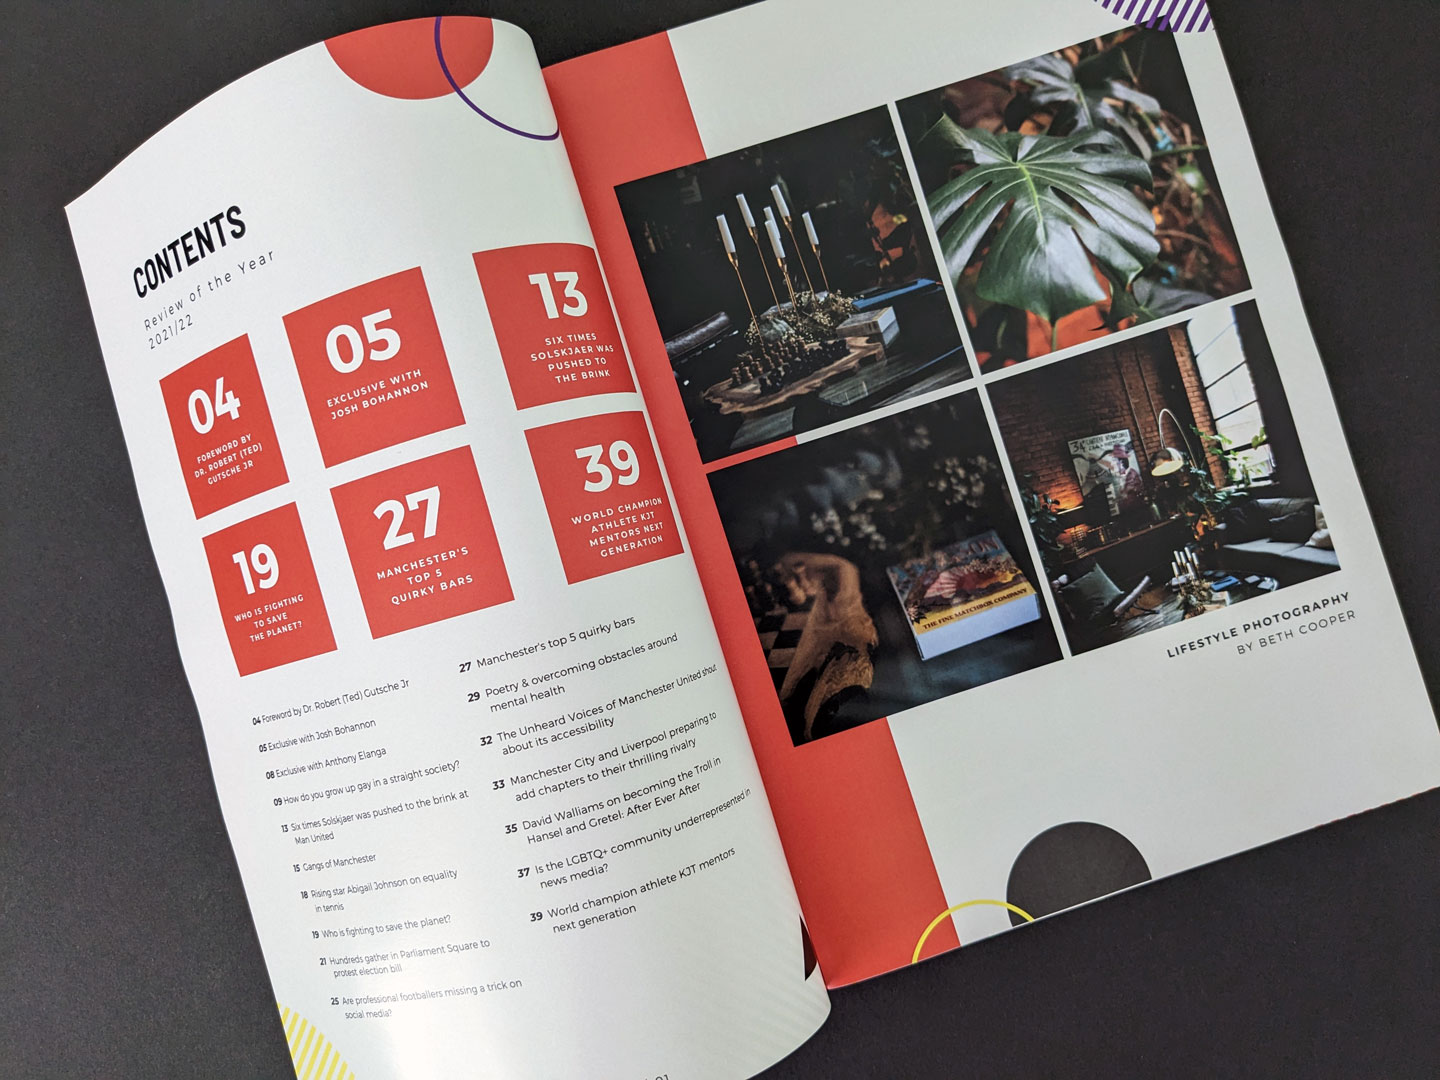 A photo of the magazine's contents and photography page, taken at an angle. The page on the left has the contents, with featured elements highlighted in large red squares with white text. The page on the right showcases four lifestyle photography images by Beth Cooper.